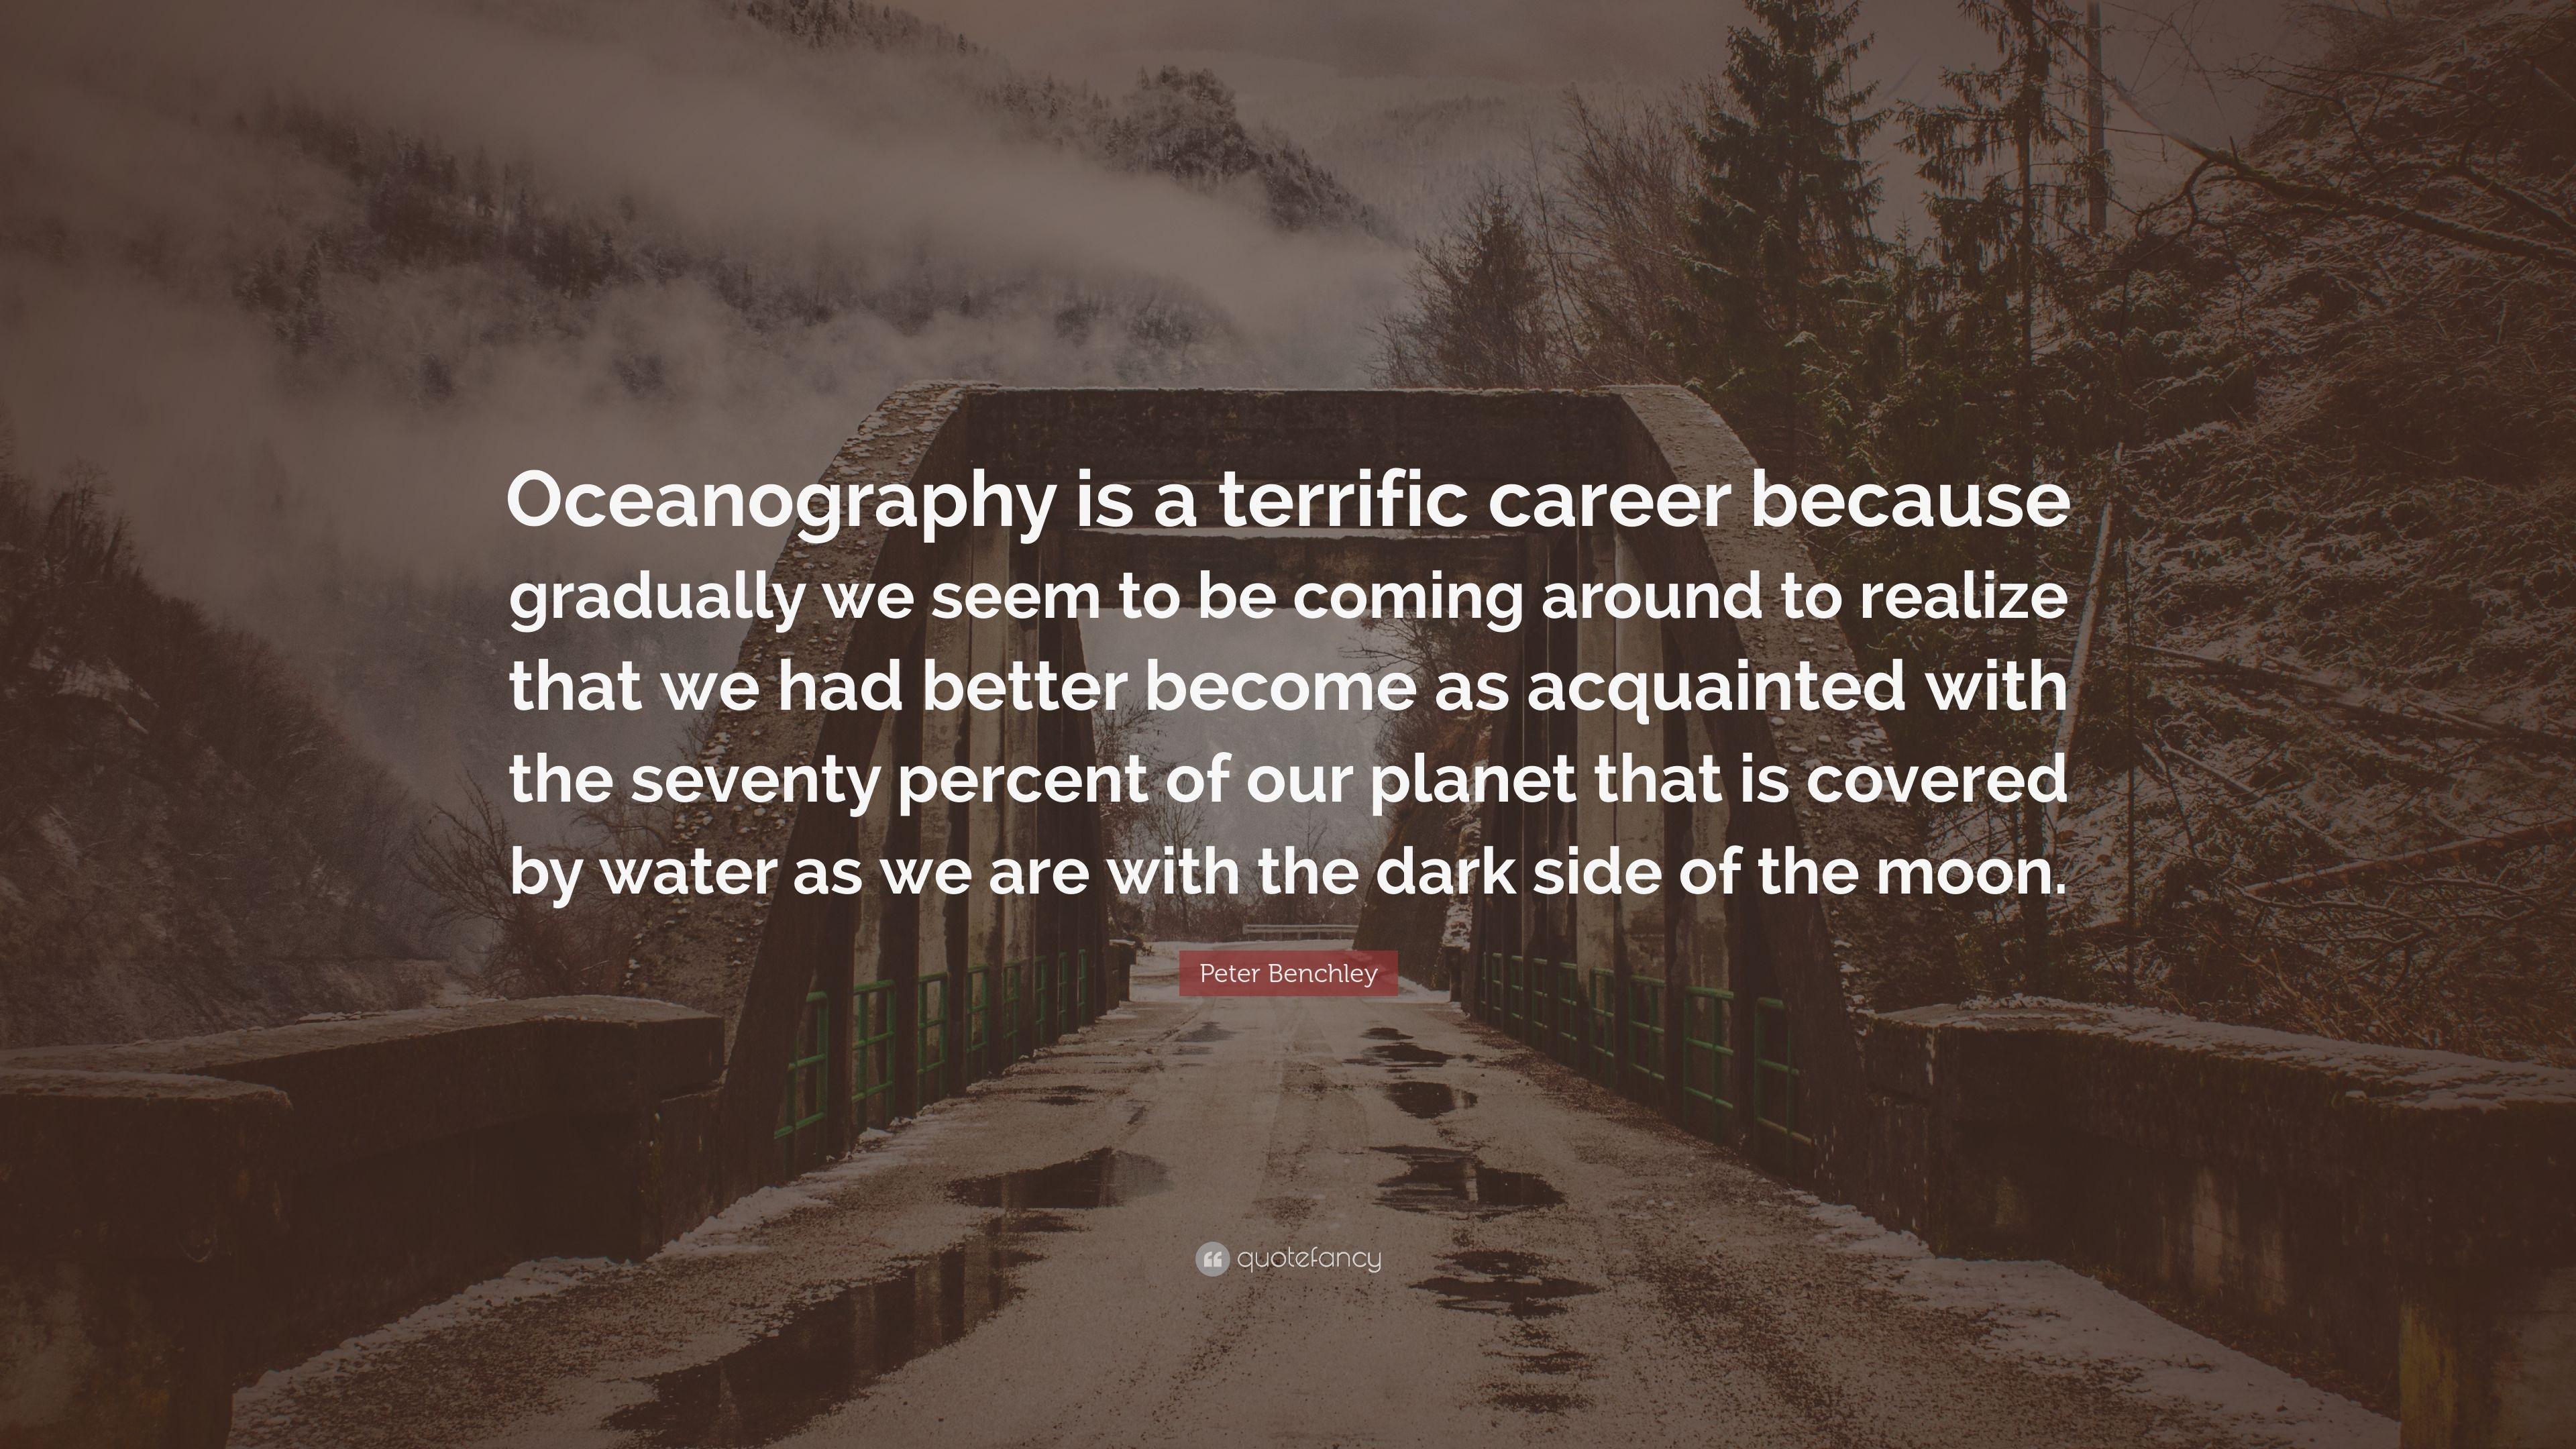 Peter Benchley Quote: "Oceanography is a terrific career because 